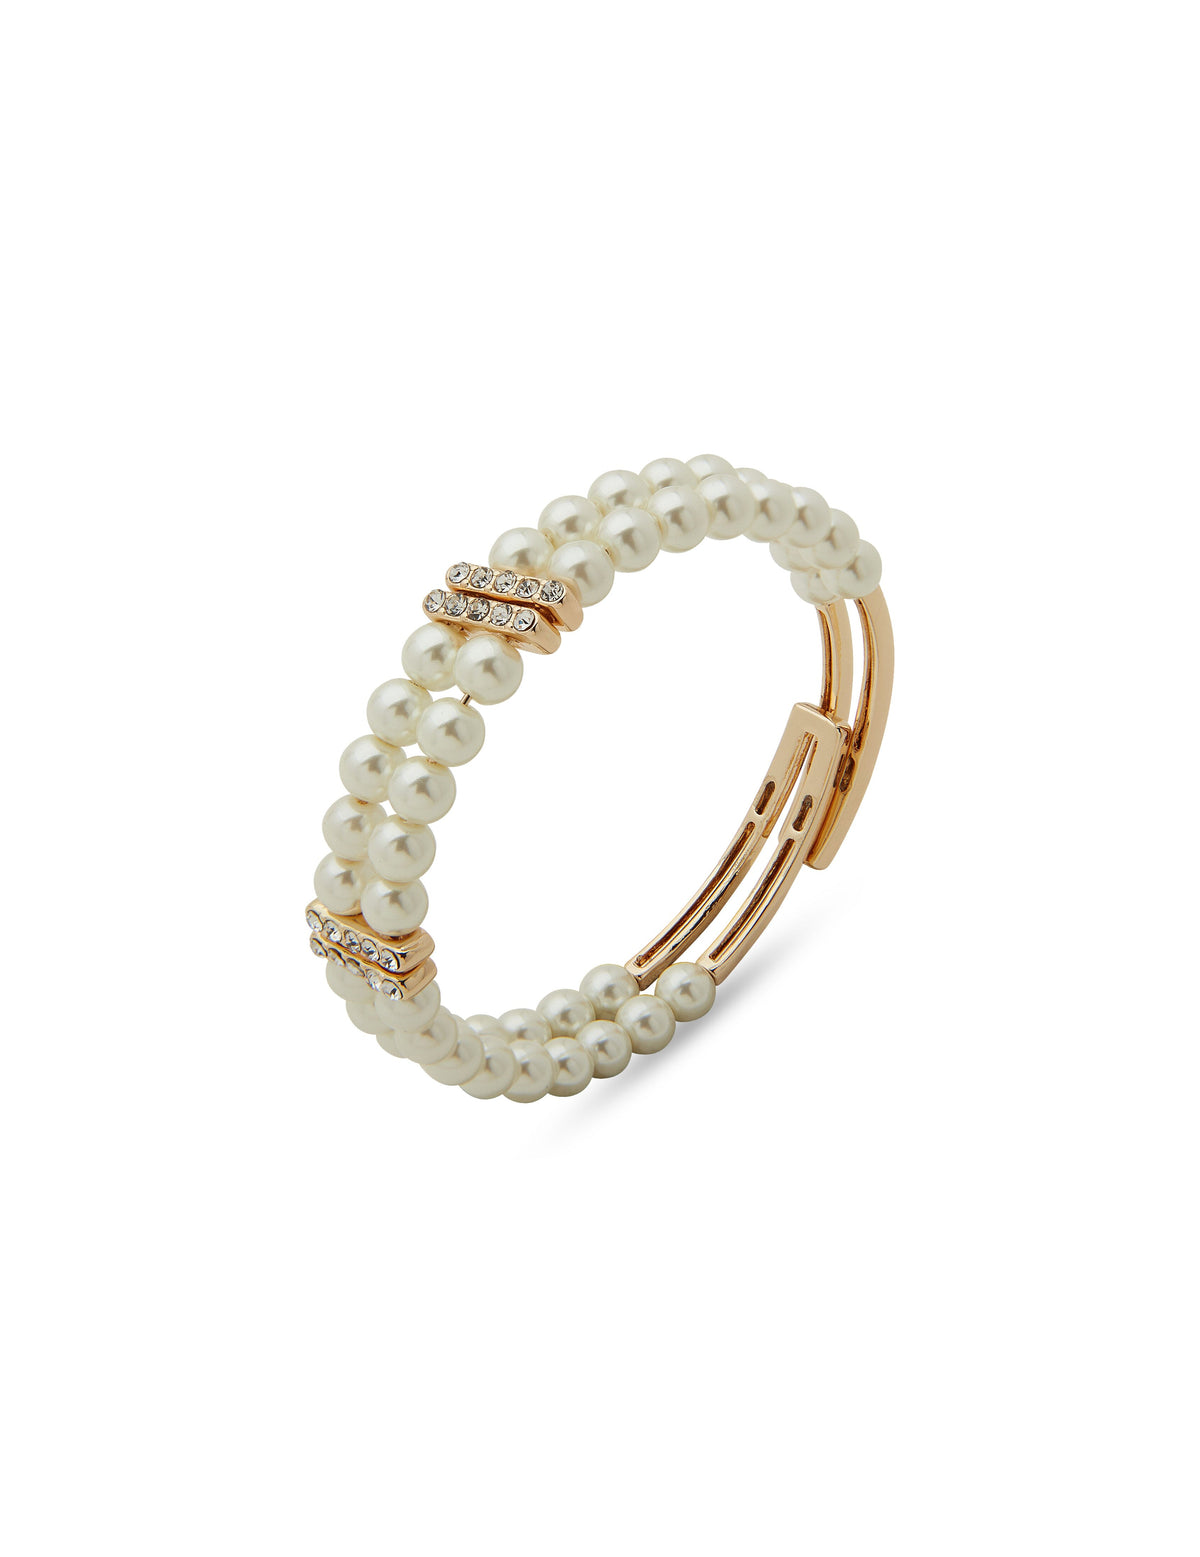 Anne Klein Gold Tone 2 Row Pearl Coil Bracelet in Gift Box